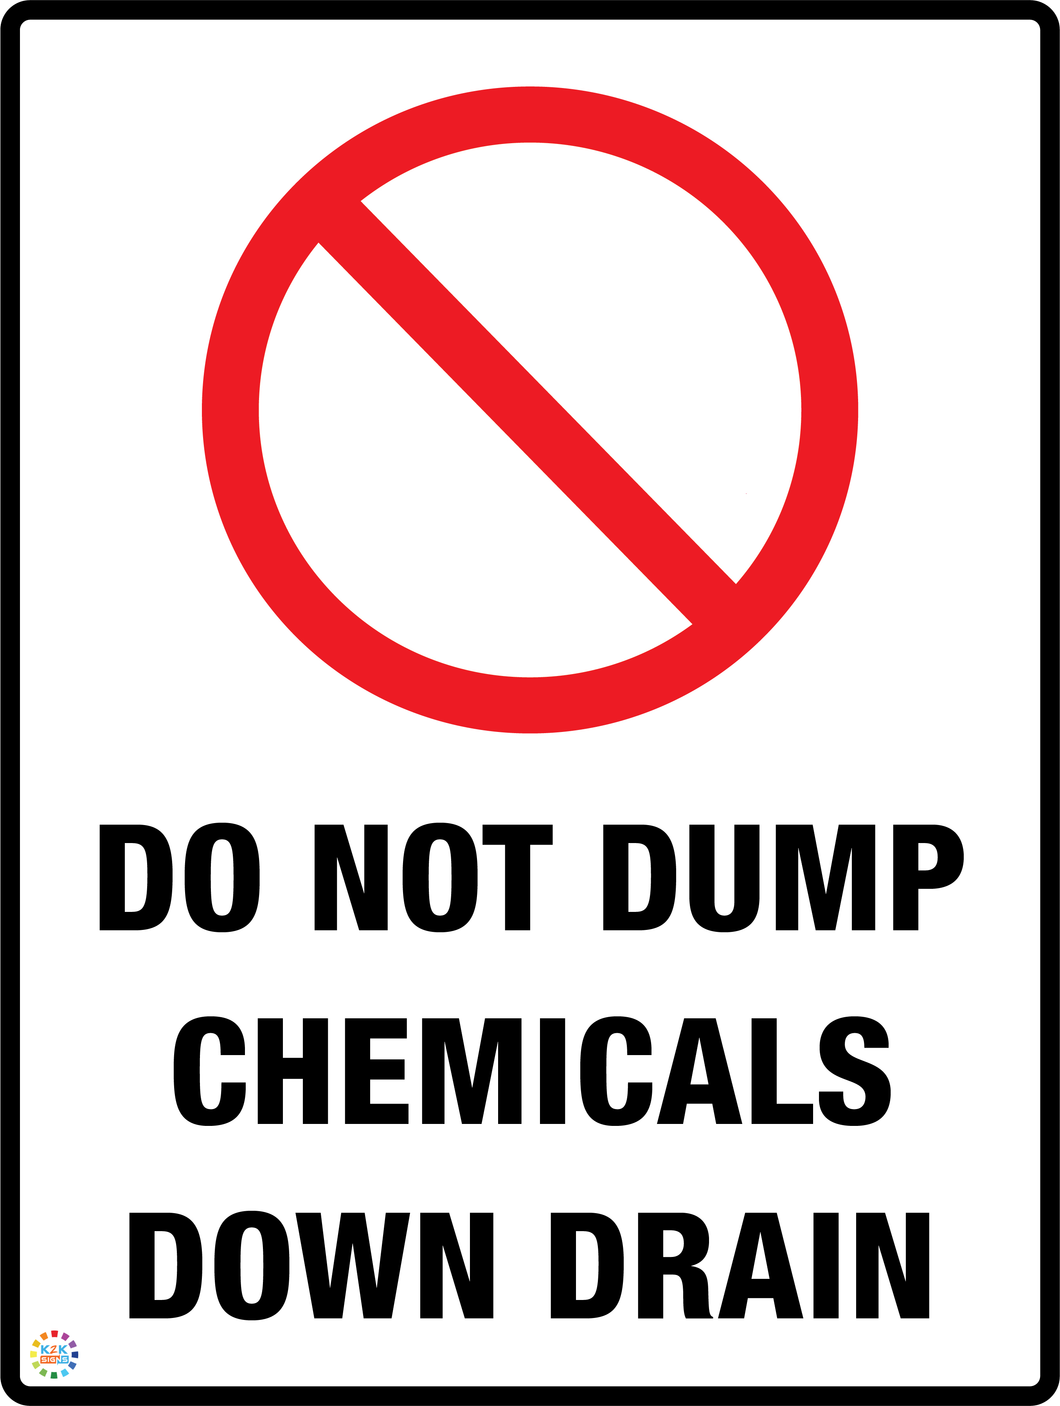 Do Not Dump<br/> Chemicals Down Drain